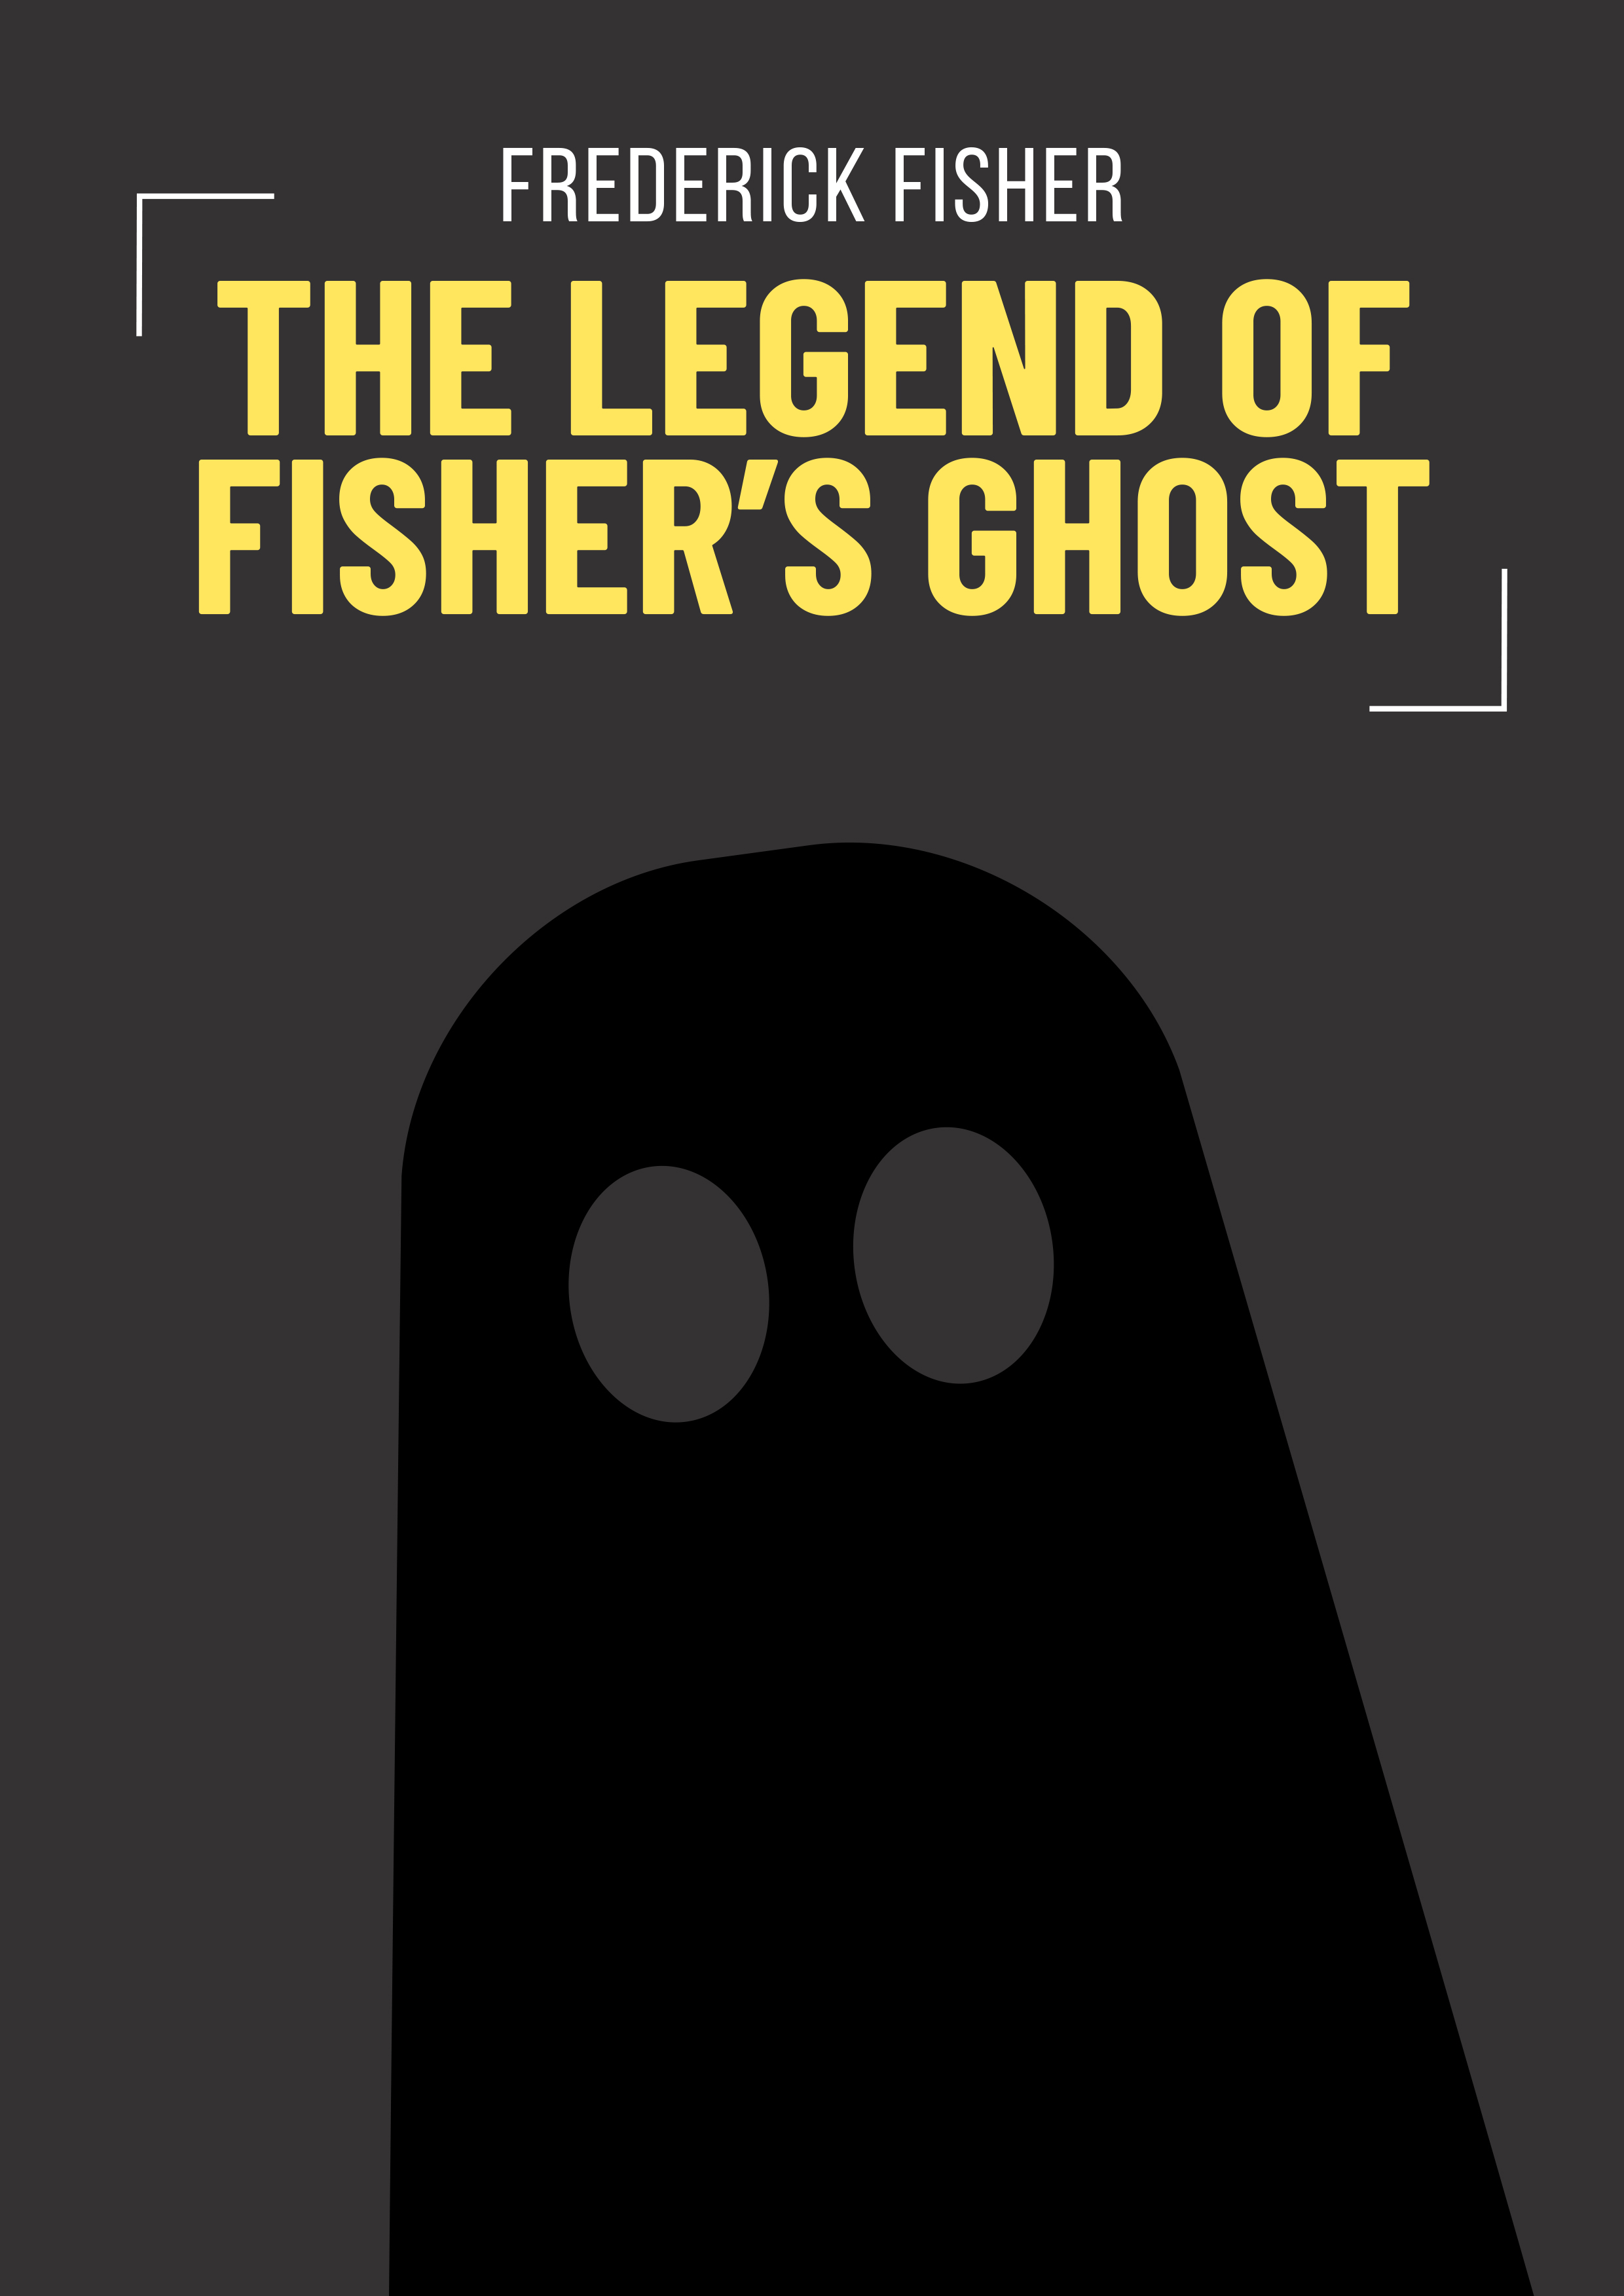 Frederick Fisher - The Legend of Fisher's Ghost Booklet Cover